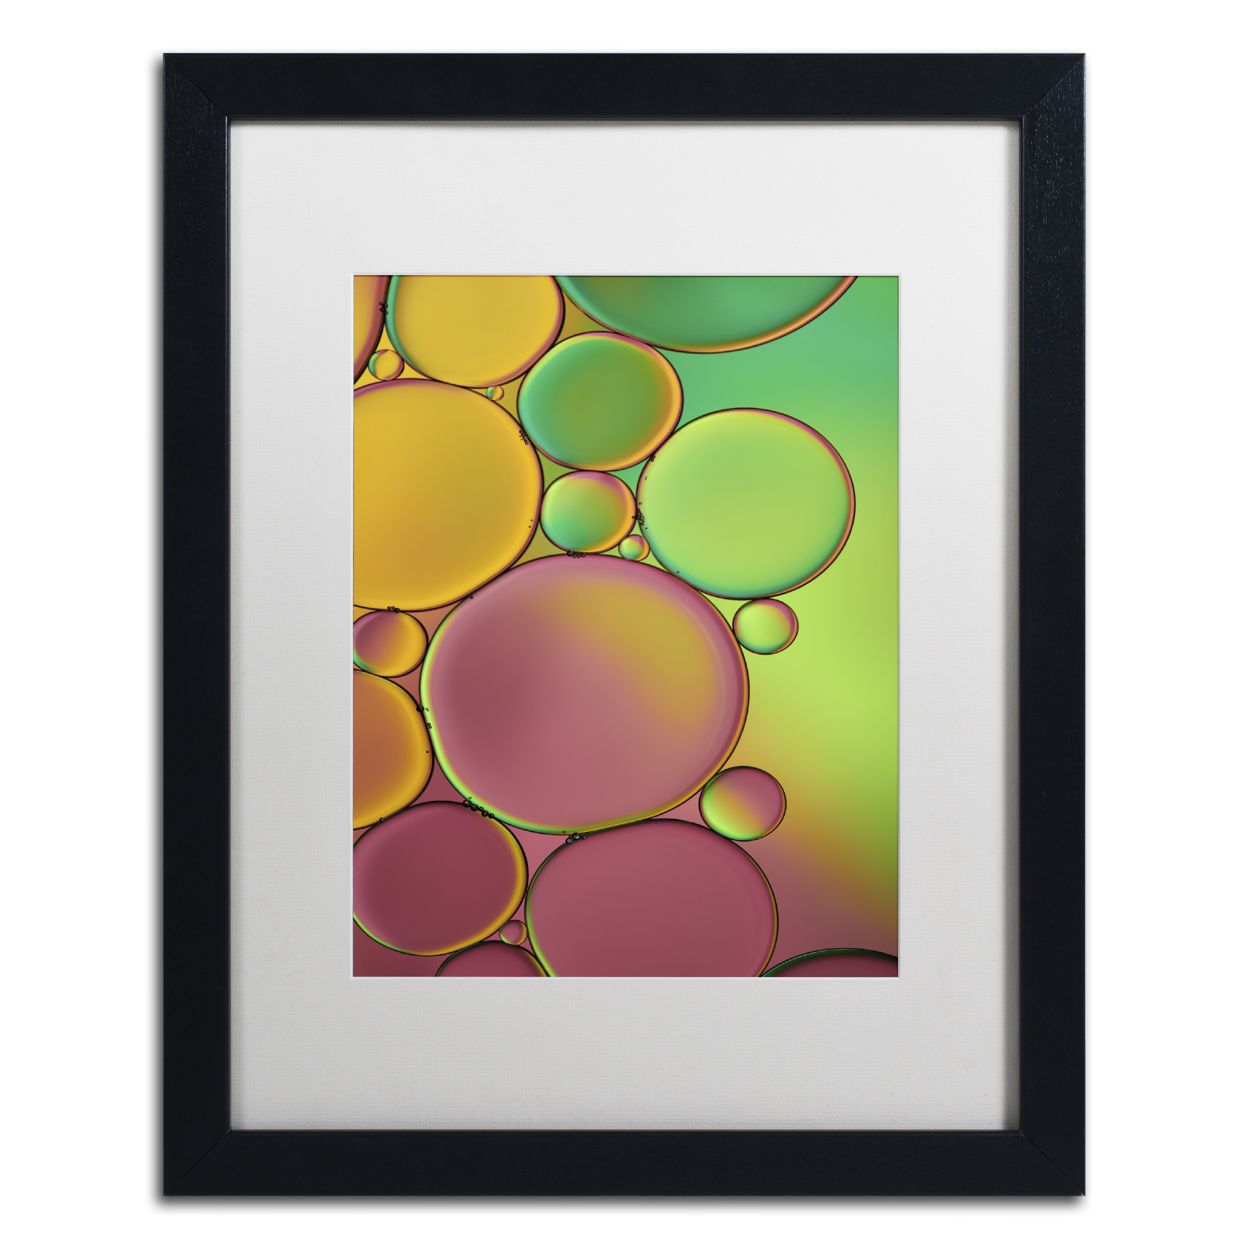 Cora Niele 'Green And Orange Drops' Black Wooden Framed Art 18 X 22 Inches